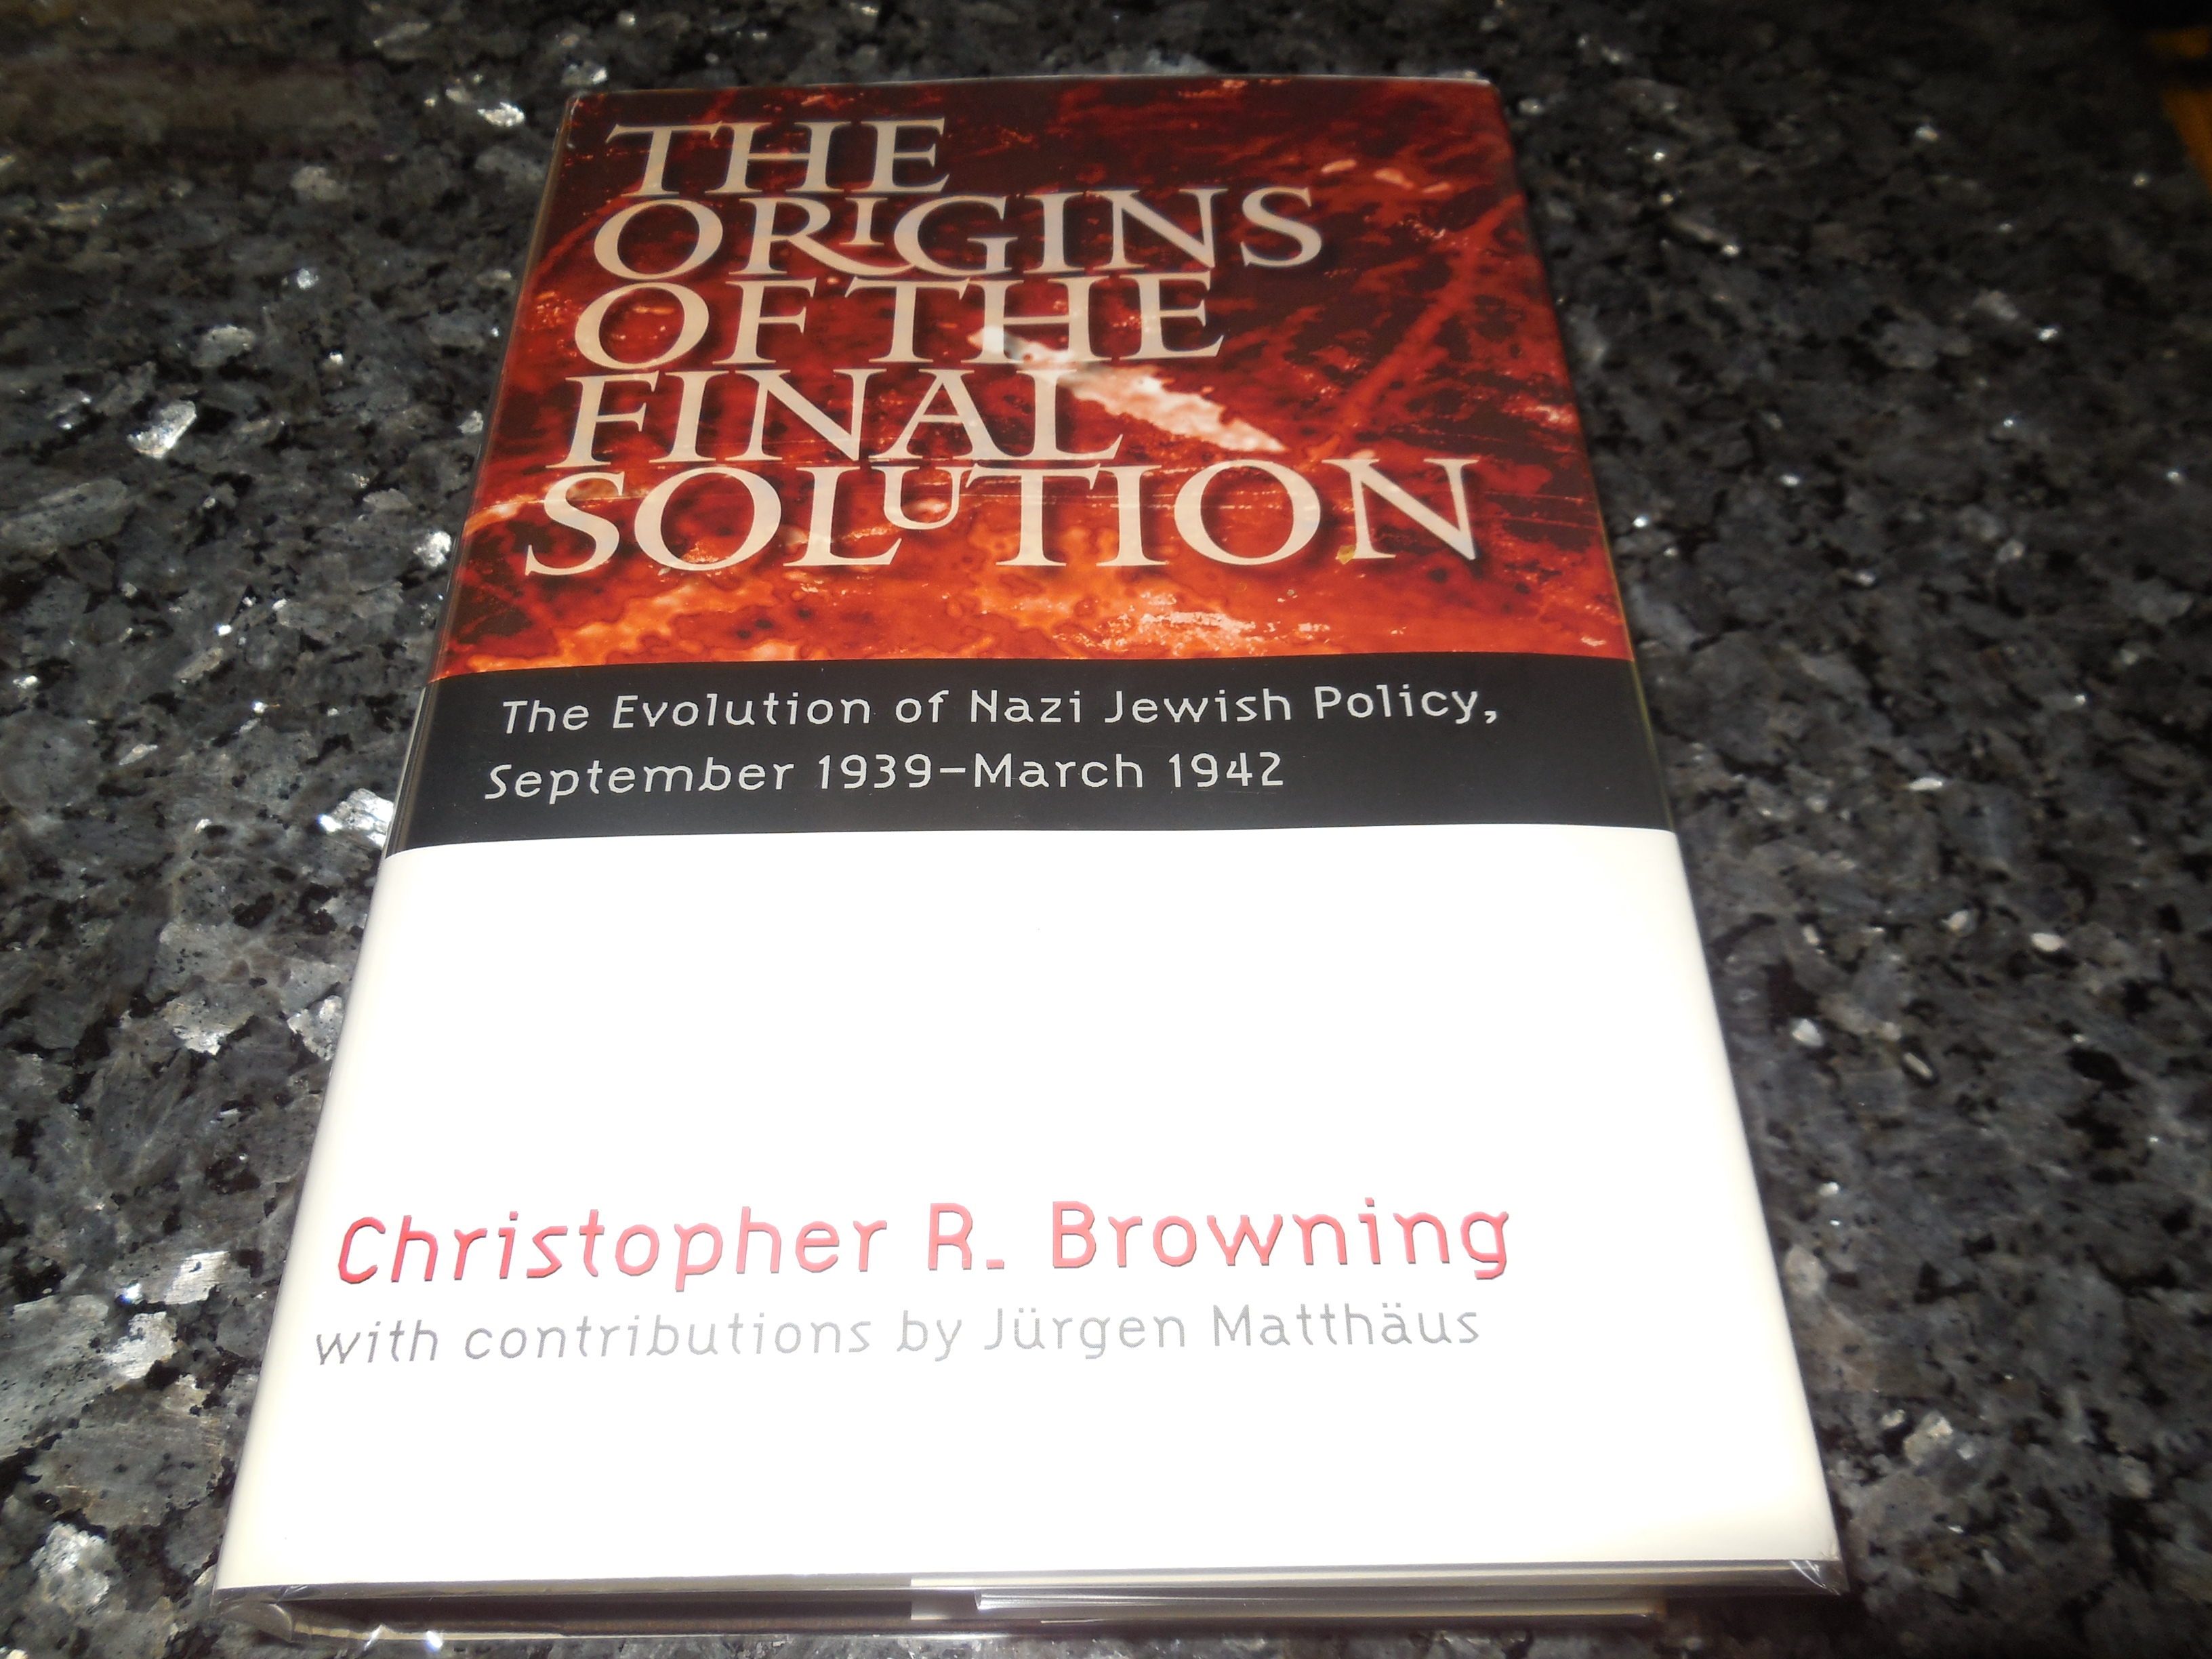 The Origins of the Final Solution: The Evolution of Nazi Jewish Policy, September 1939-March 1942 (Comprehensive History of the Holocaust) - Browning, Christopher R.